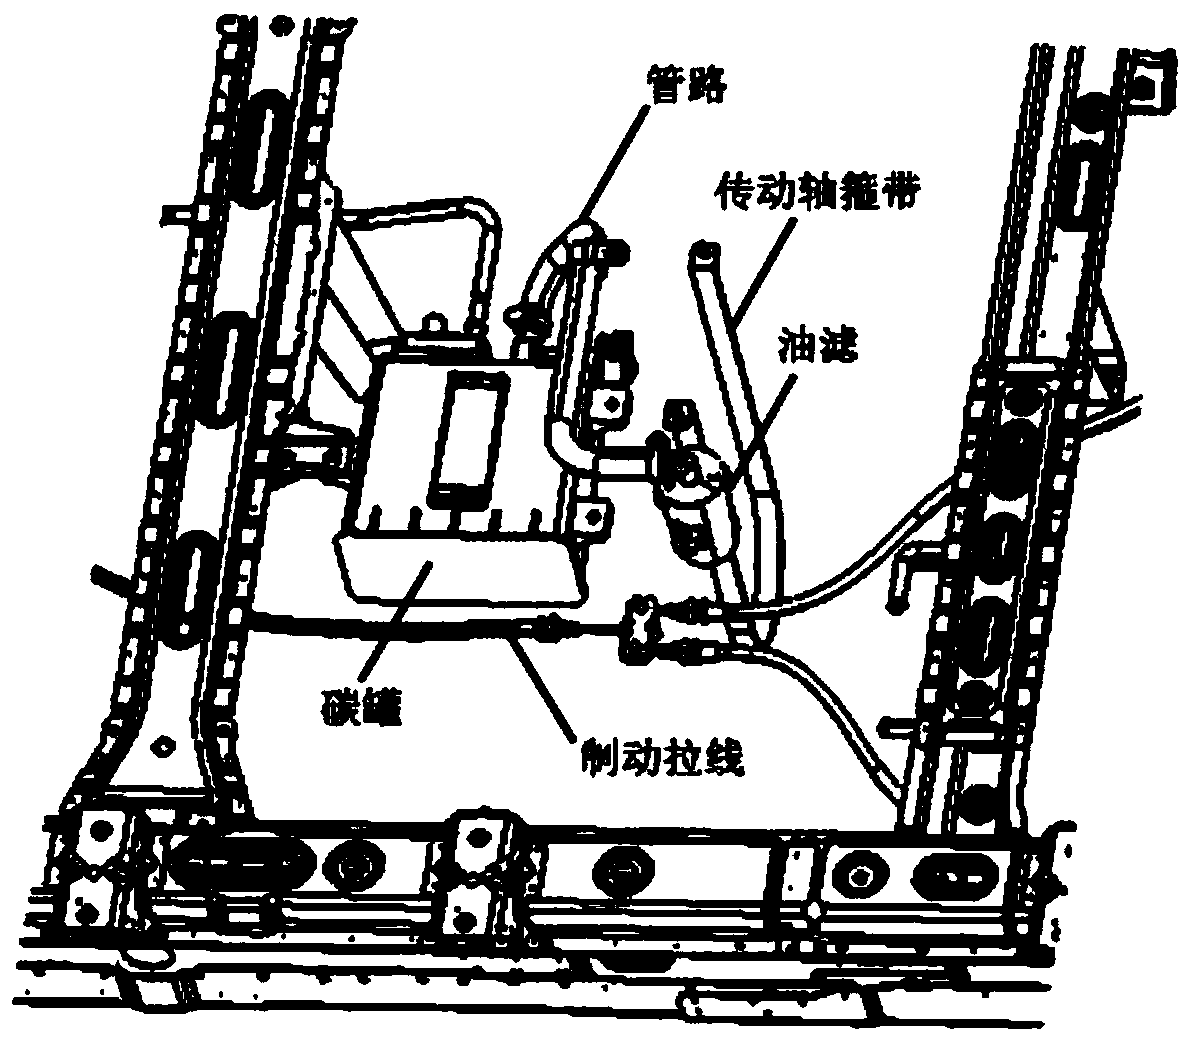 Lower body cross beam structure of micro-truck, and machining process thereof